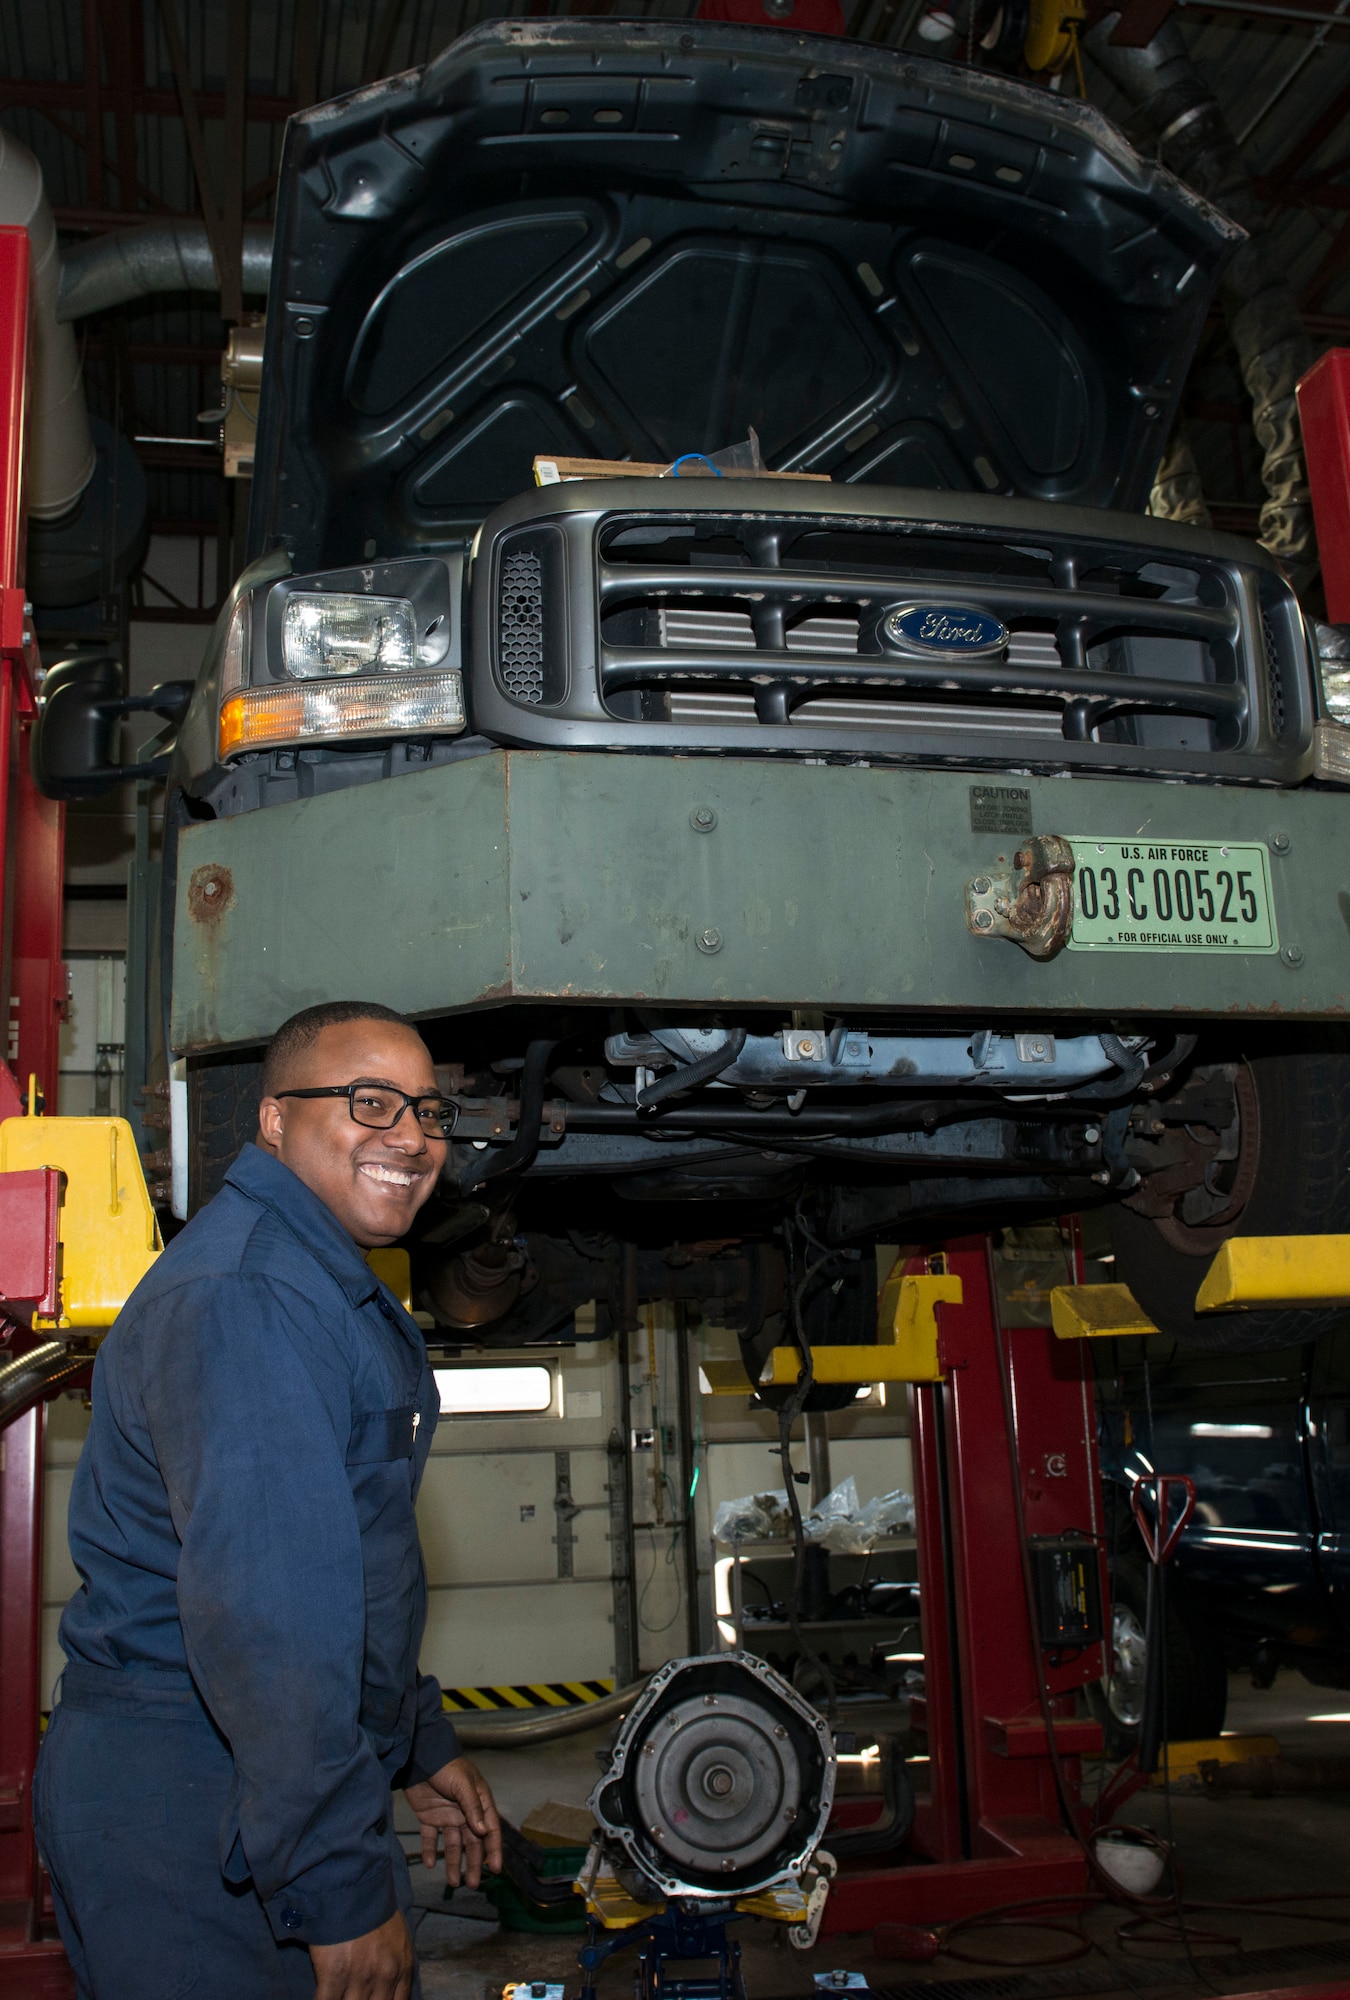 Airman 1st Class Tacito Castillo, 103rd Logistics Readiness Squadron vehicle maintenance specialist, repairs a truck at Bradley Air National Guard Base, East Granby, Conn. Nov. 3, 2019. Vehicle maintenance specialists perform scheduled maintenance and necessary repairs to Bradley’s entire fleet of vehicles, ensuring readiness of organizations throughout the installation, including aircraft maintenance and fire and emergency services. (U.S. Air National Guard photo by Senior Airman Sadie Hewes)